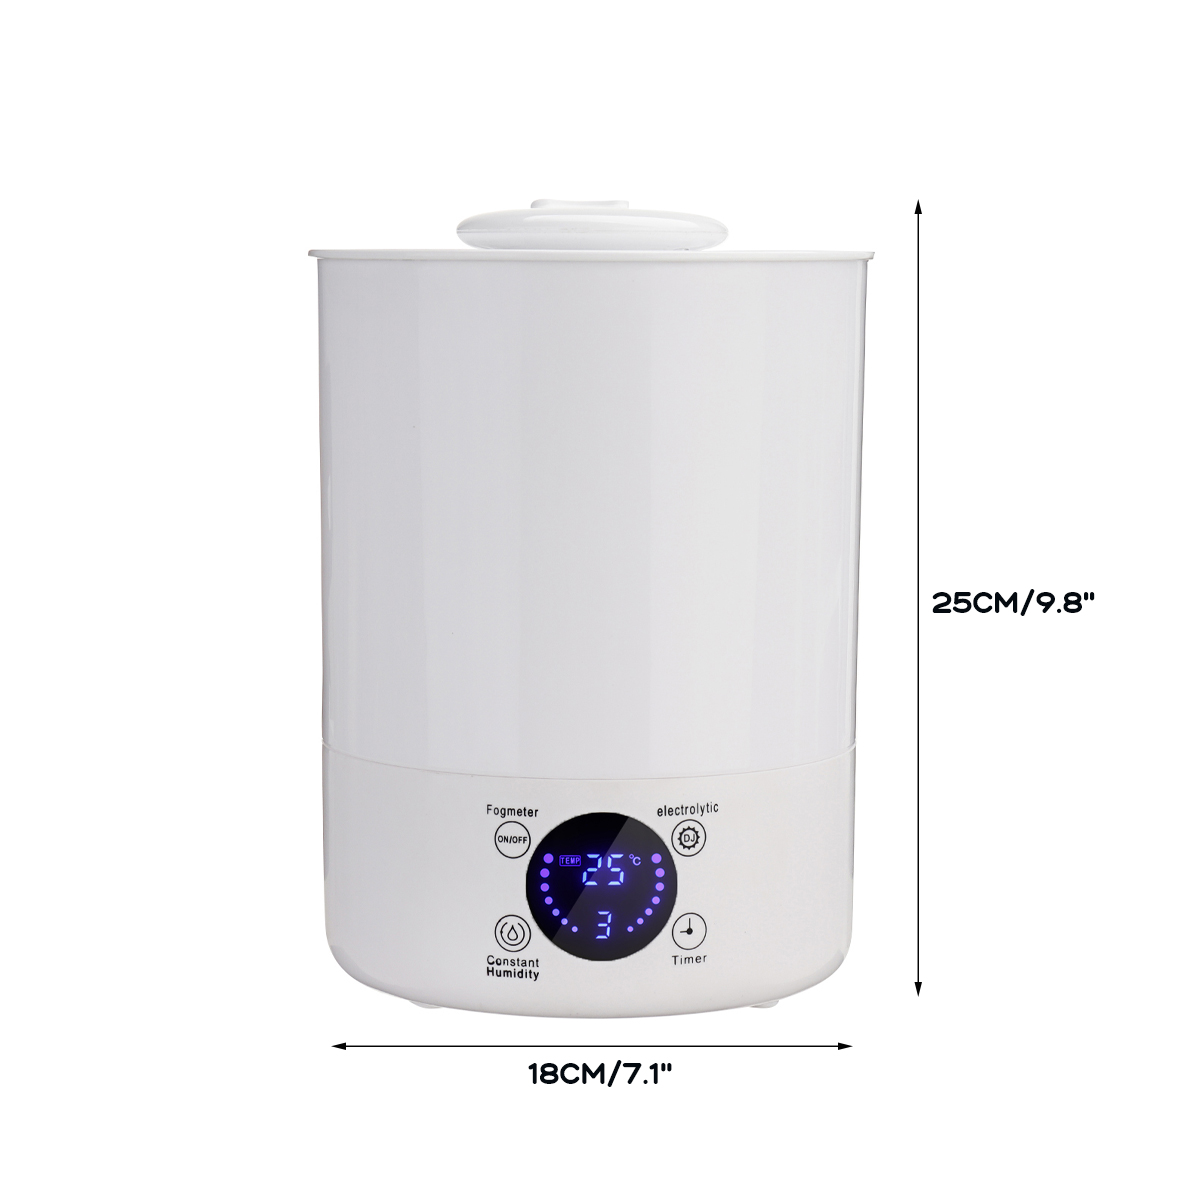 28L-LCD-Light-UP-Air-Oil-Aroma-Diffuser-Humidifier-Electric-Home-Purifier-1940222-9